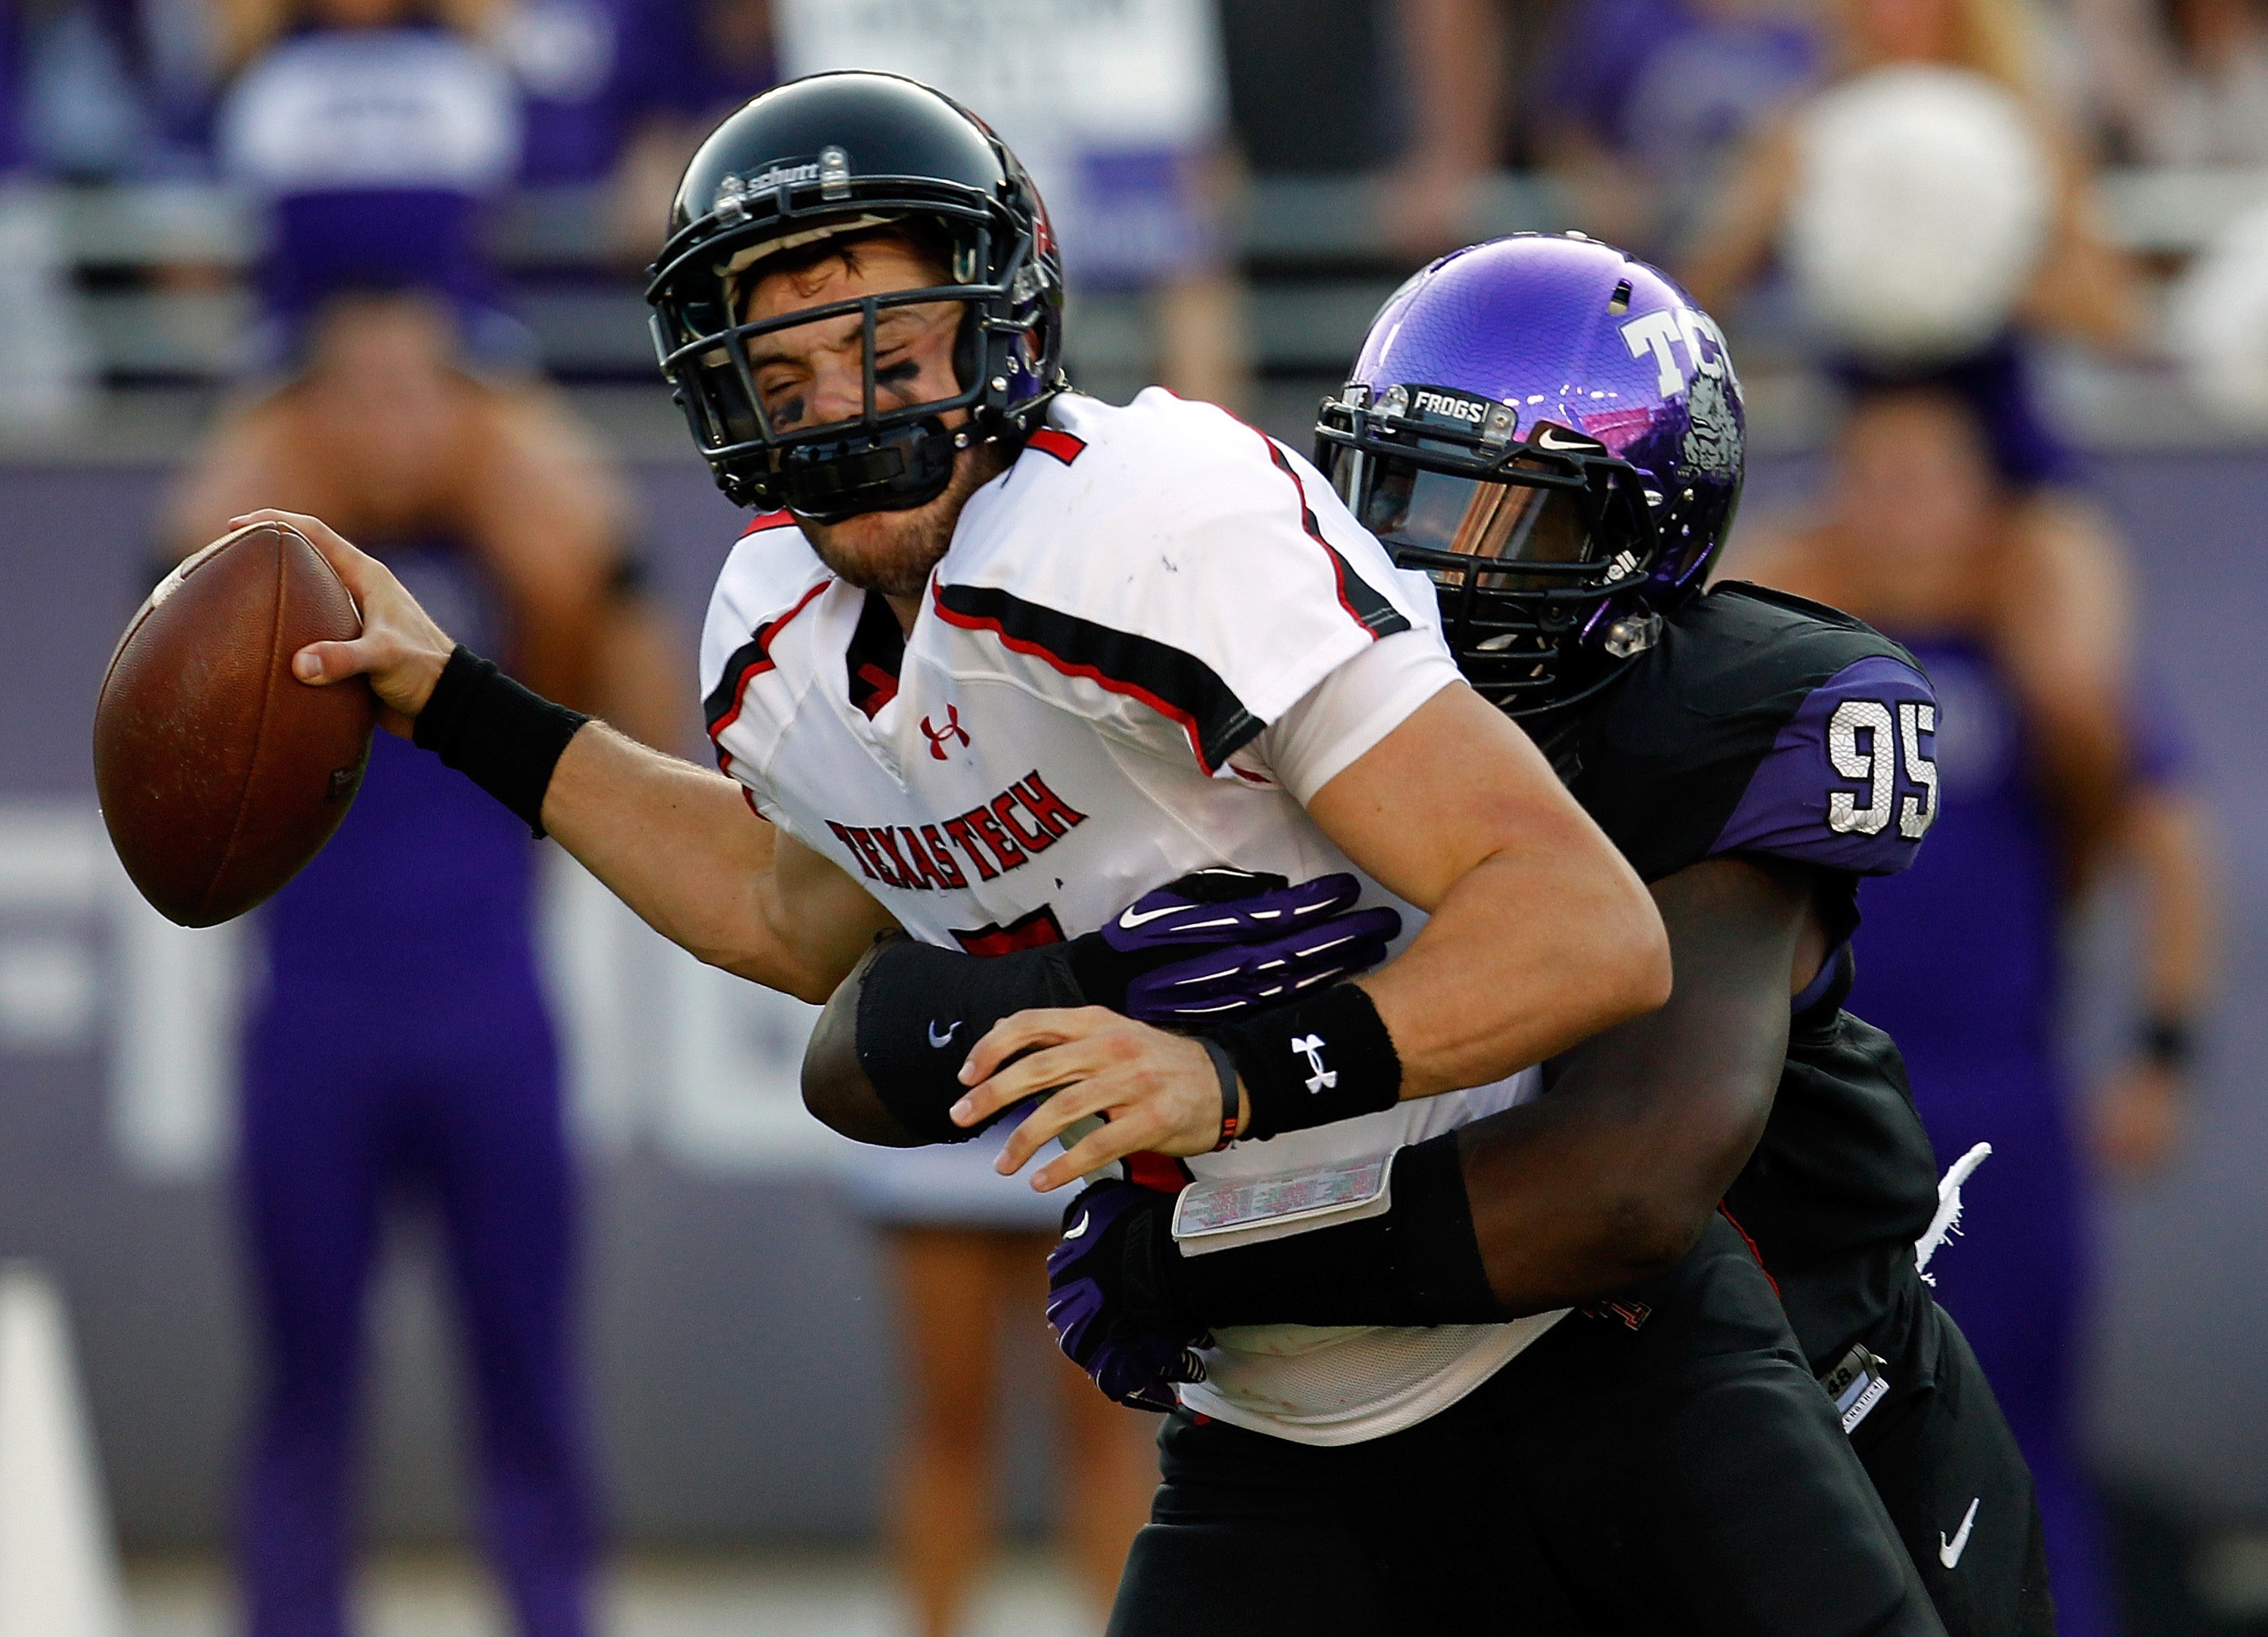 Seth Doege #7 of the Texas Tech Red Raiders is sacked for a loss by Devonte Fields #95 of the TCU Horned Frogs. (Photo by Tom Pennington/Getty Images)